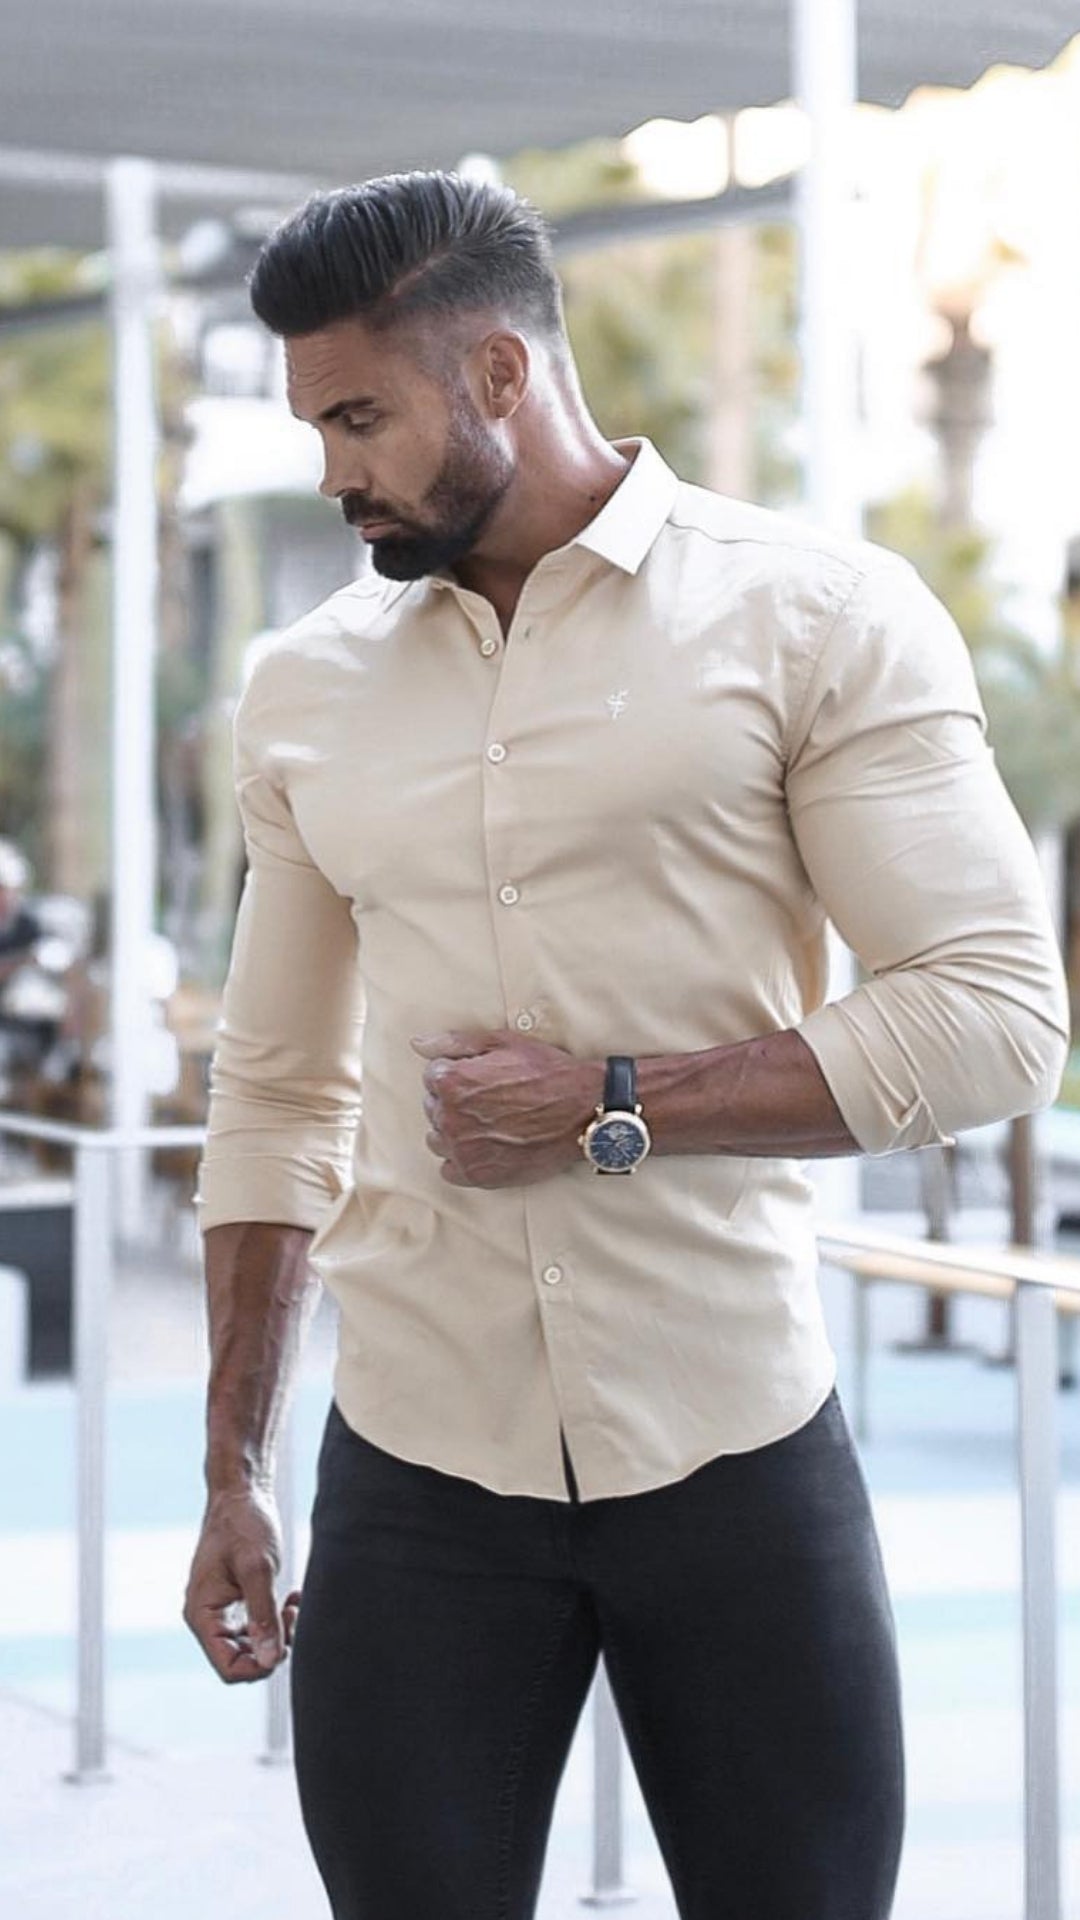 5 Outfits For Guys With Great Physique #casual #outfits #mensfashion #streetstyle